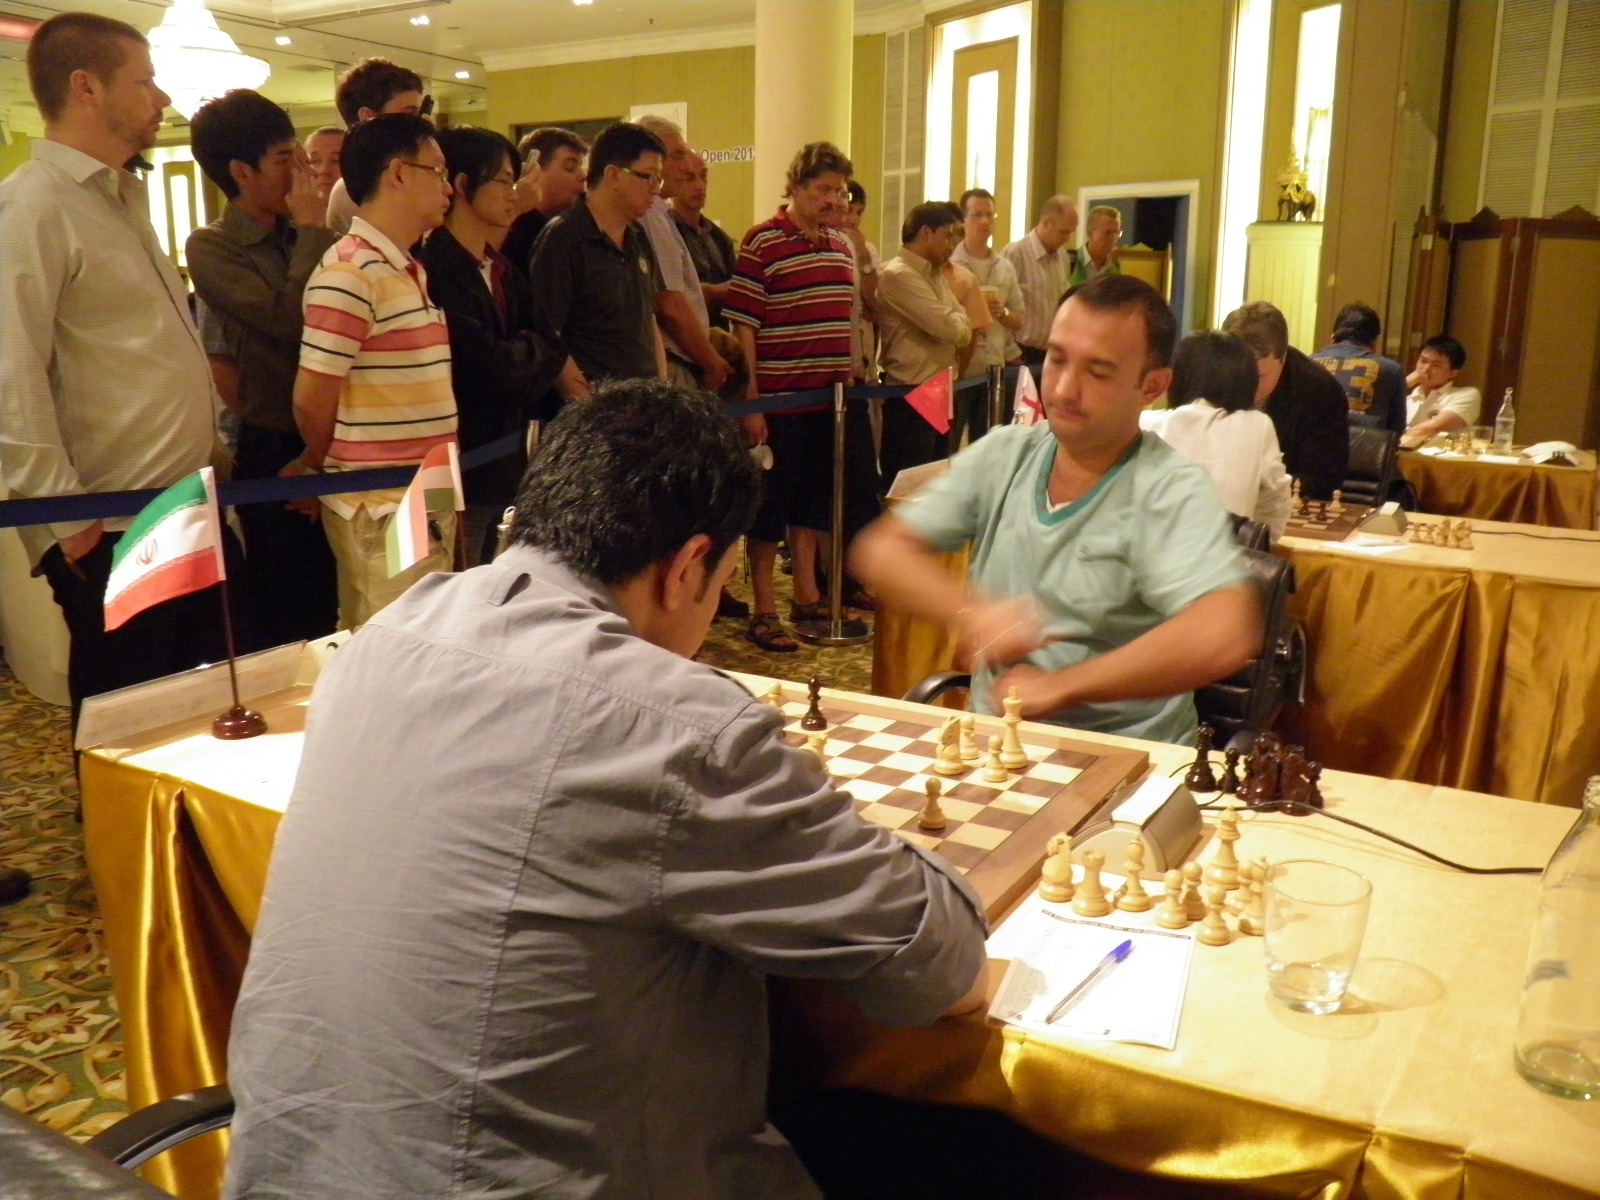 13th BCC Open 2013 switches to classical time control – Bangkok Chess Club